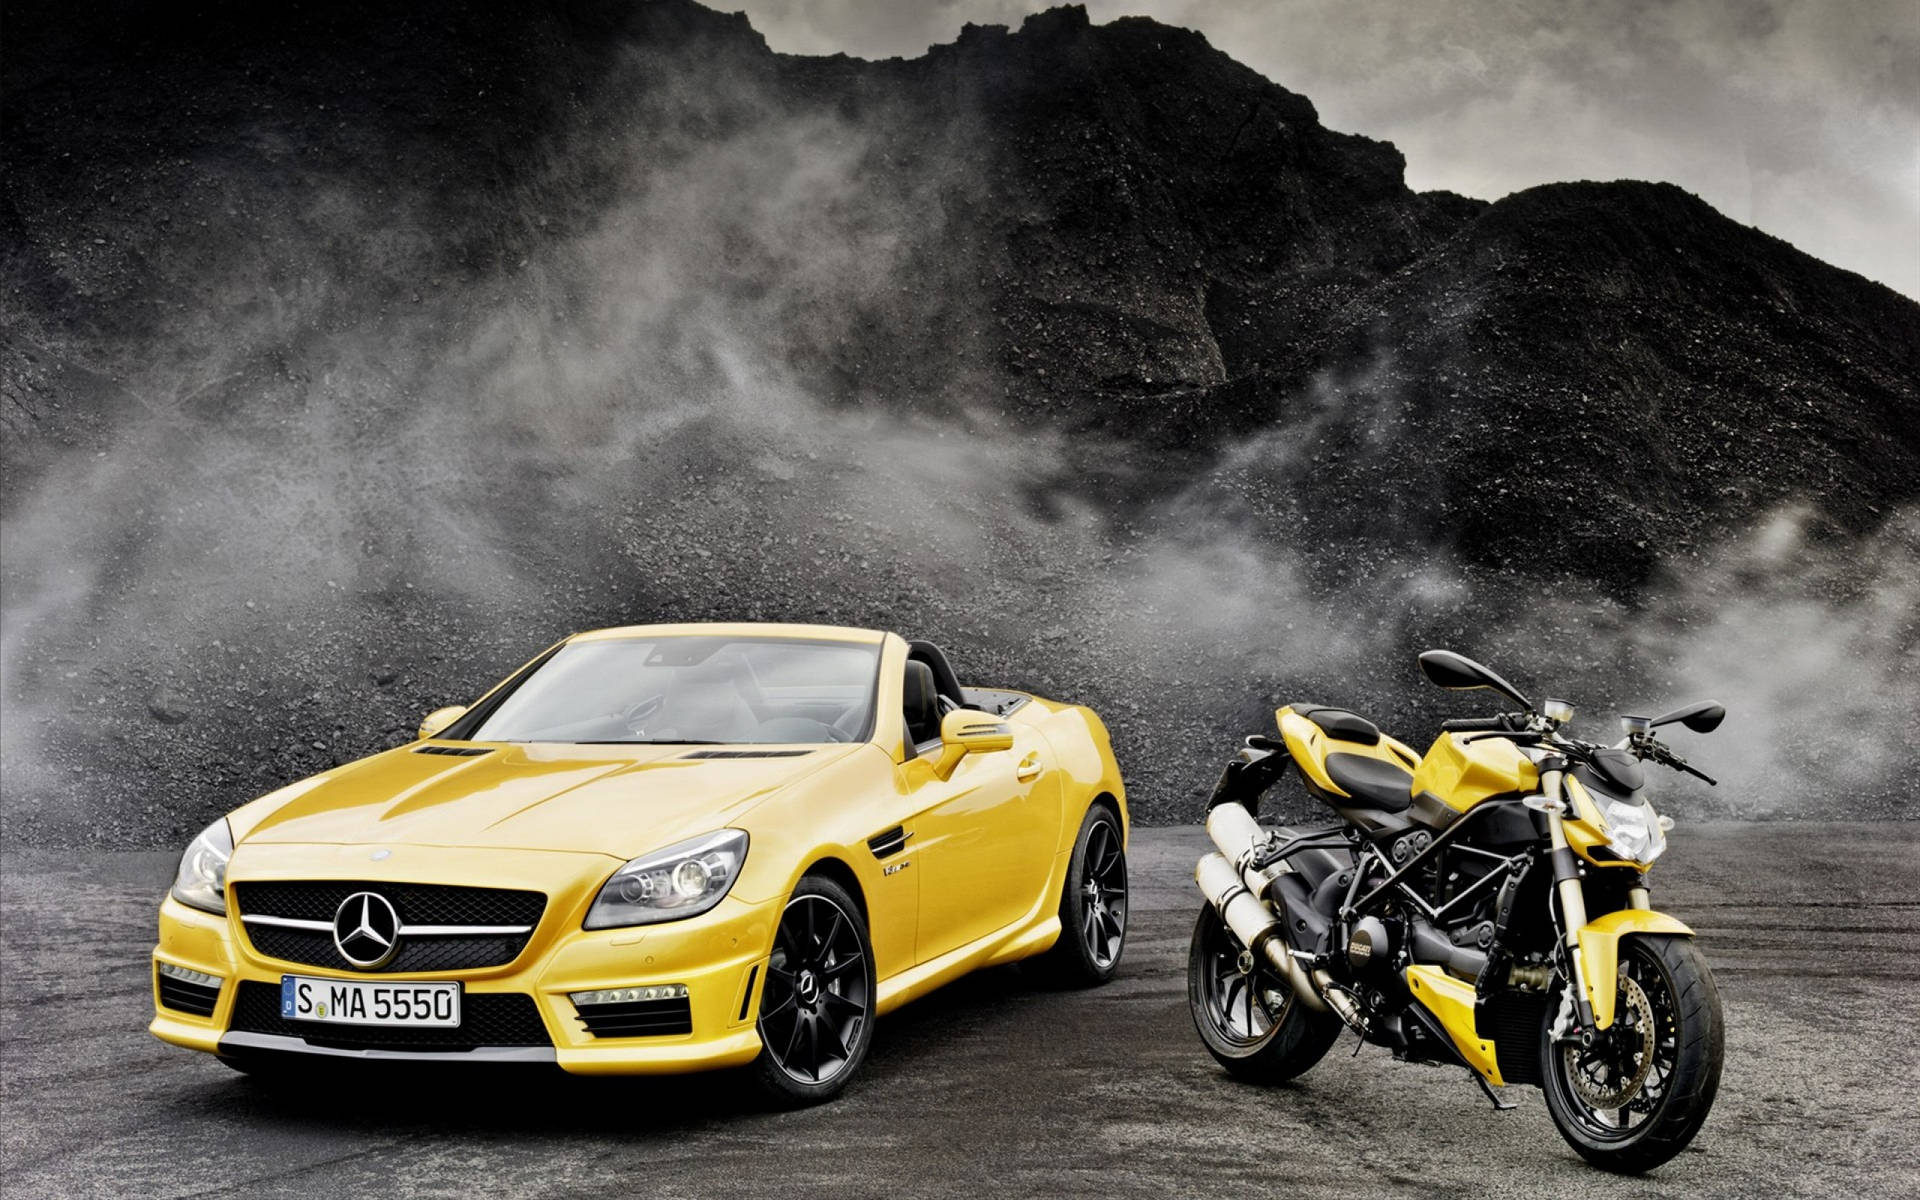 Caption: Elegance In Motion: Yellow Convertible Luxury Car Background